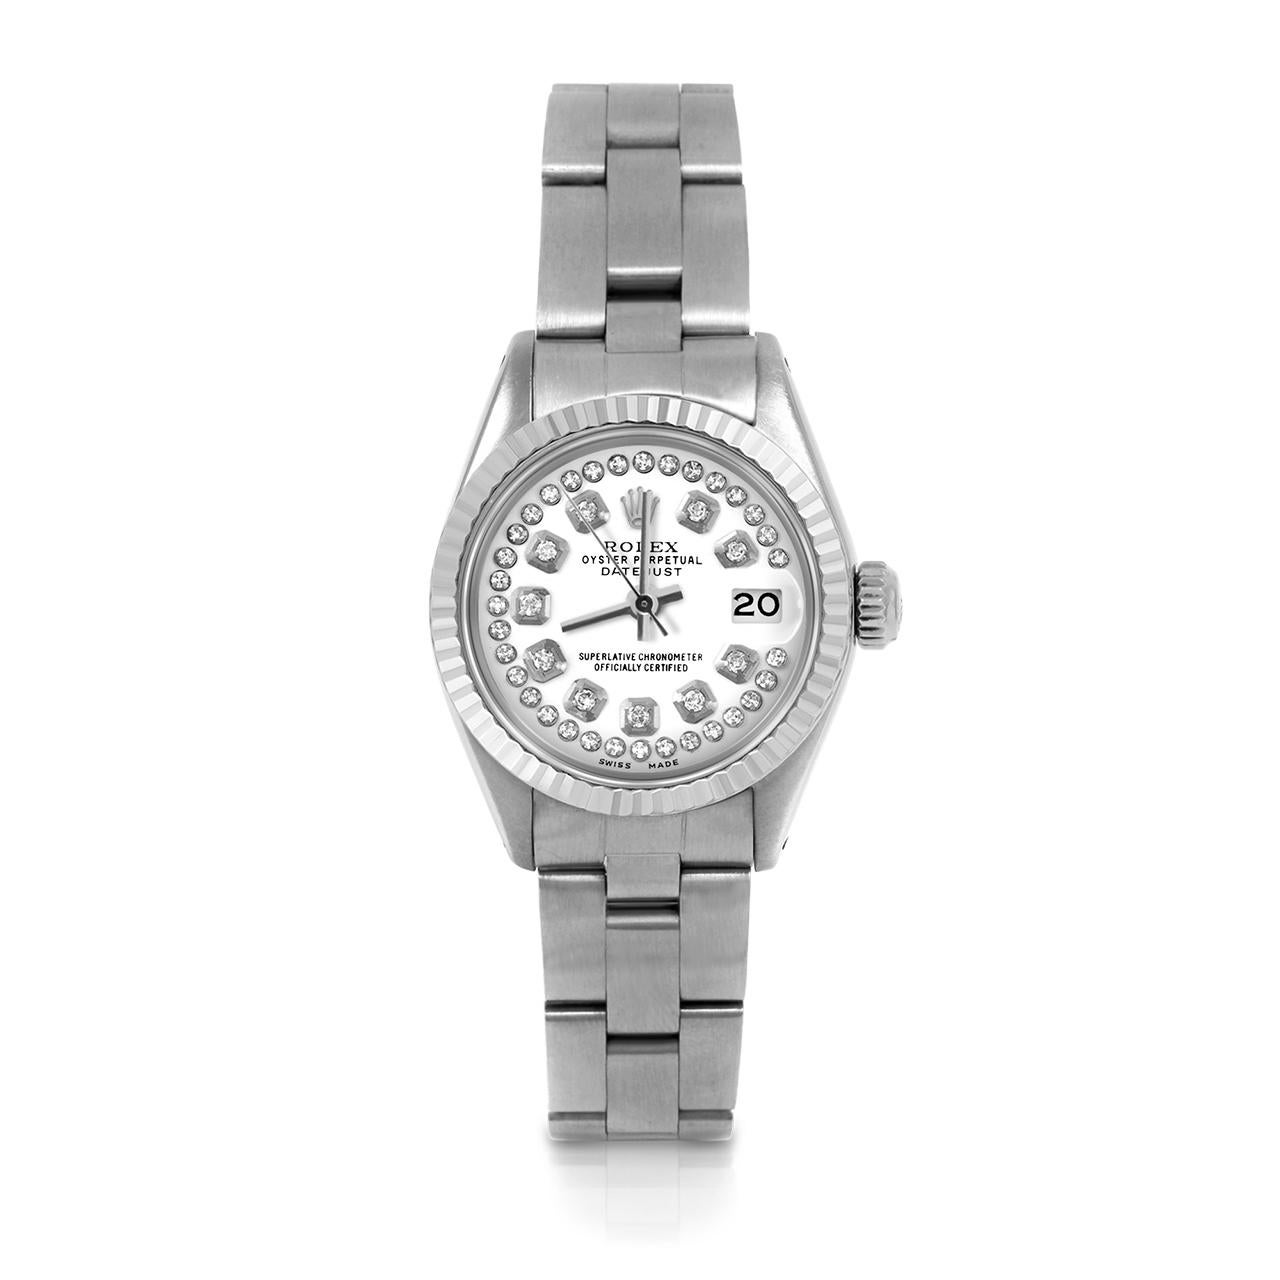 Pre-Owned Rolex 6917 Ladies 26mm Datejust Watch, Custom White String Diamond Dial & Fluted Bezel on Rolex Stainless Steel Oyster Band.   

SKU 6917-SS-WHT-STRD-FLT-OYS


Brand/Model:        Rolex Datejust
Model Number:        6917
Style:       